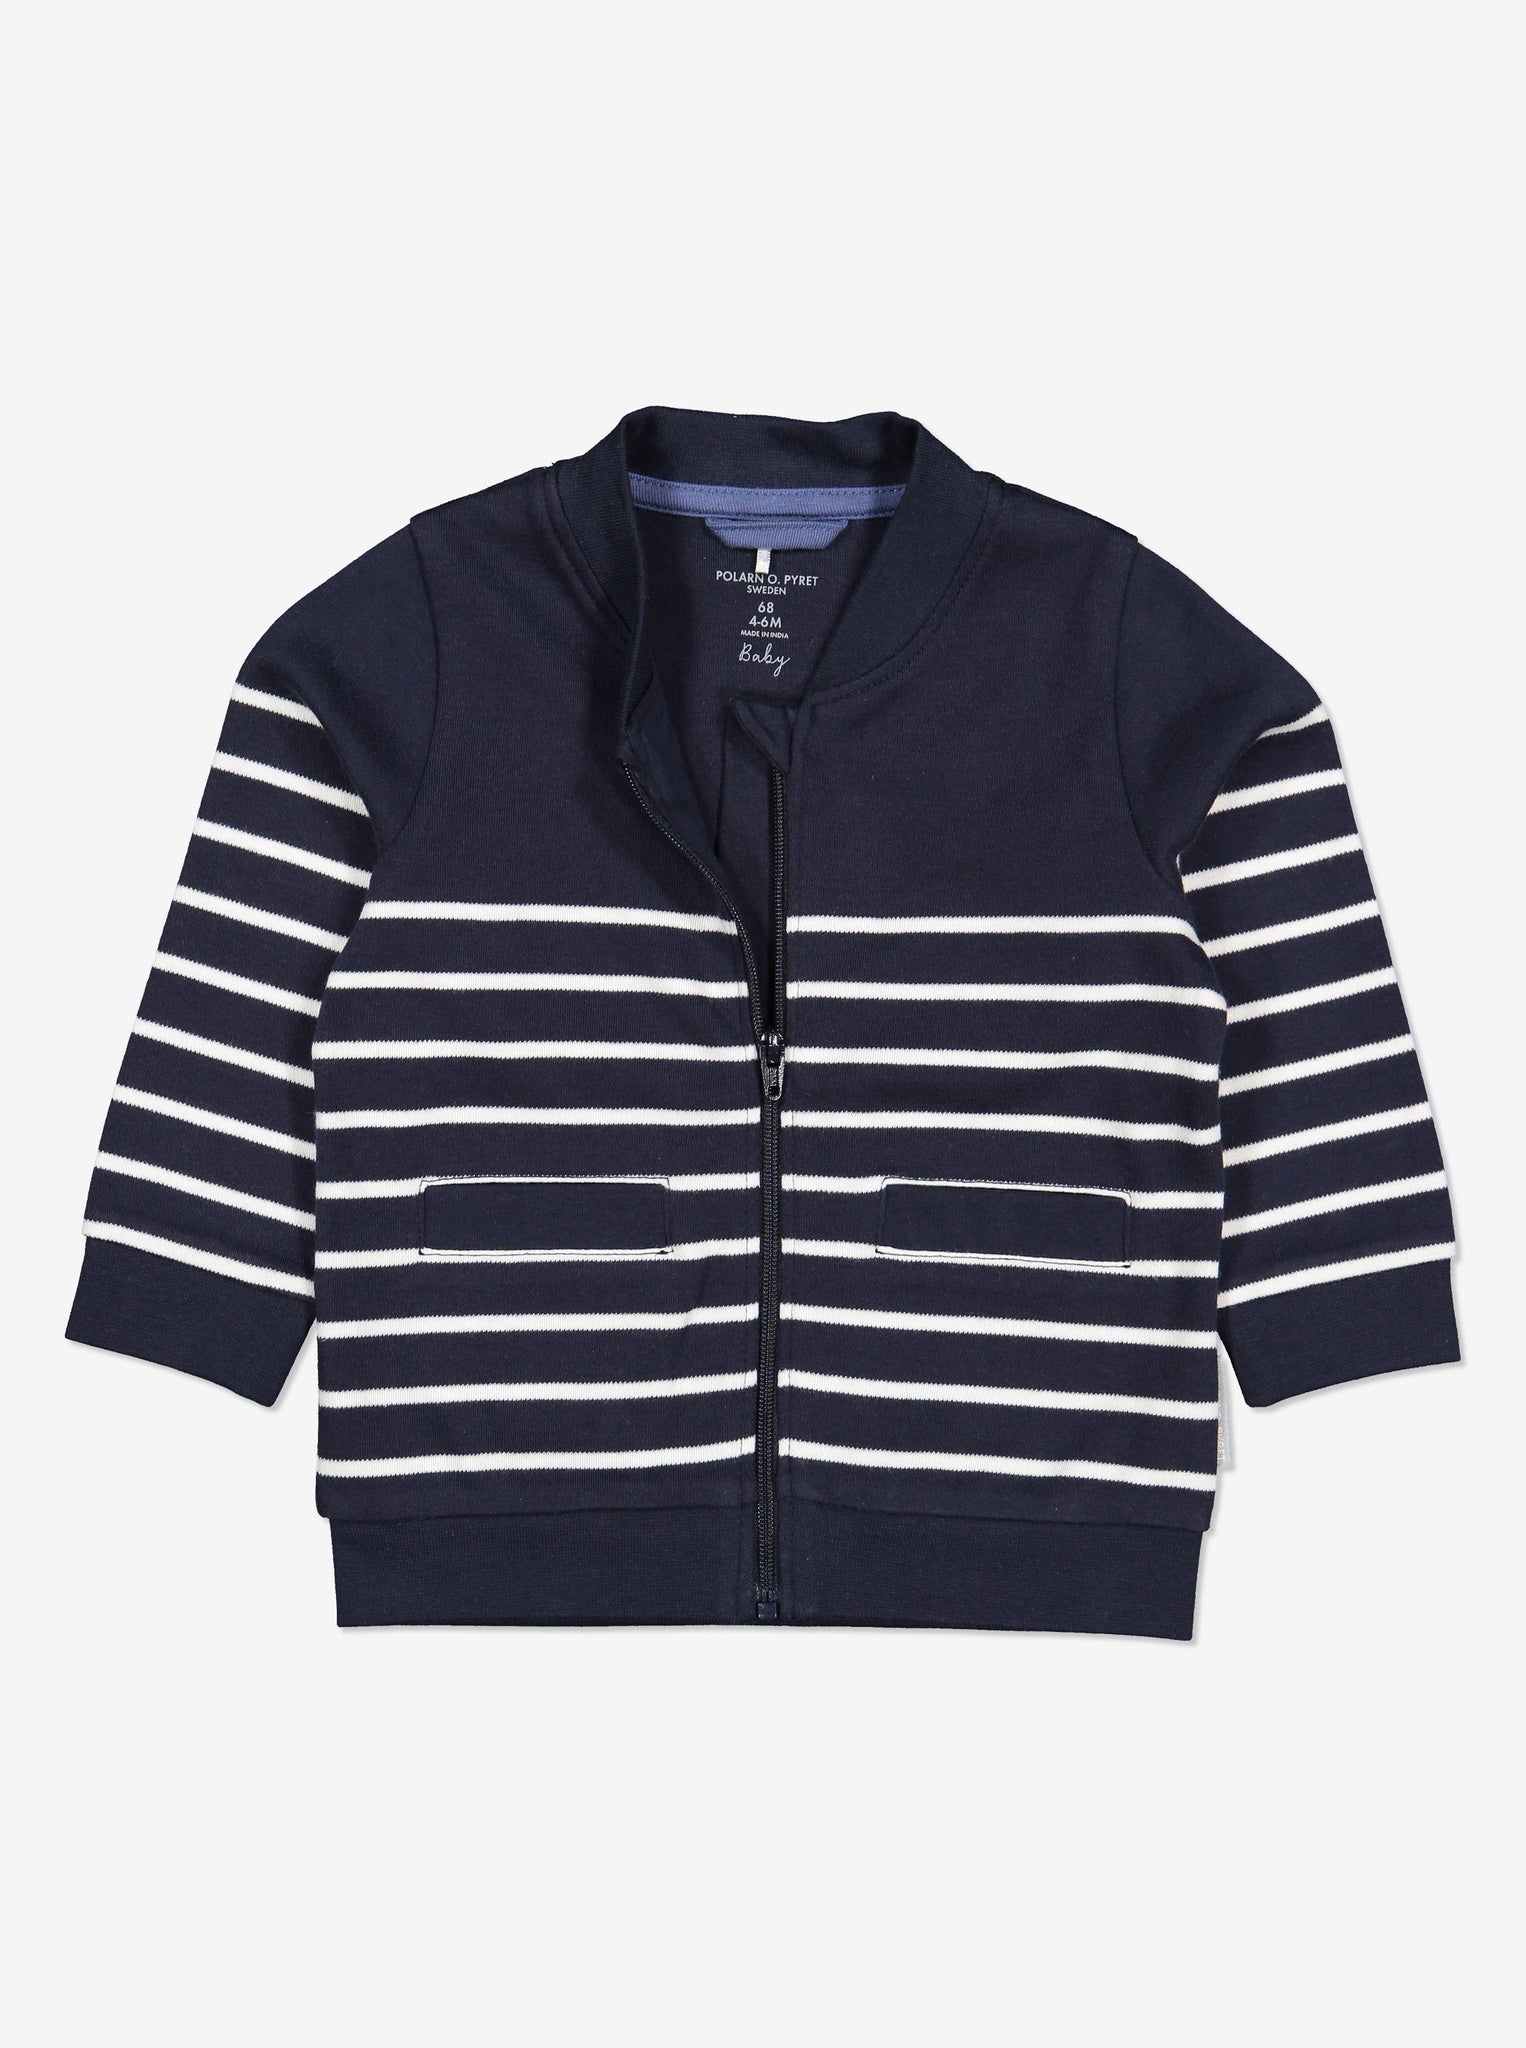 Organic cotton zipped baby sweatshirt. In classic navy and white stripes shown with zip half open. 